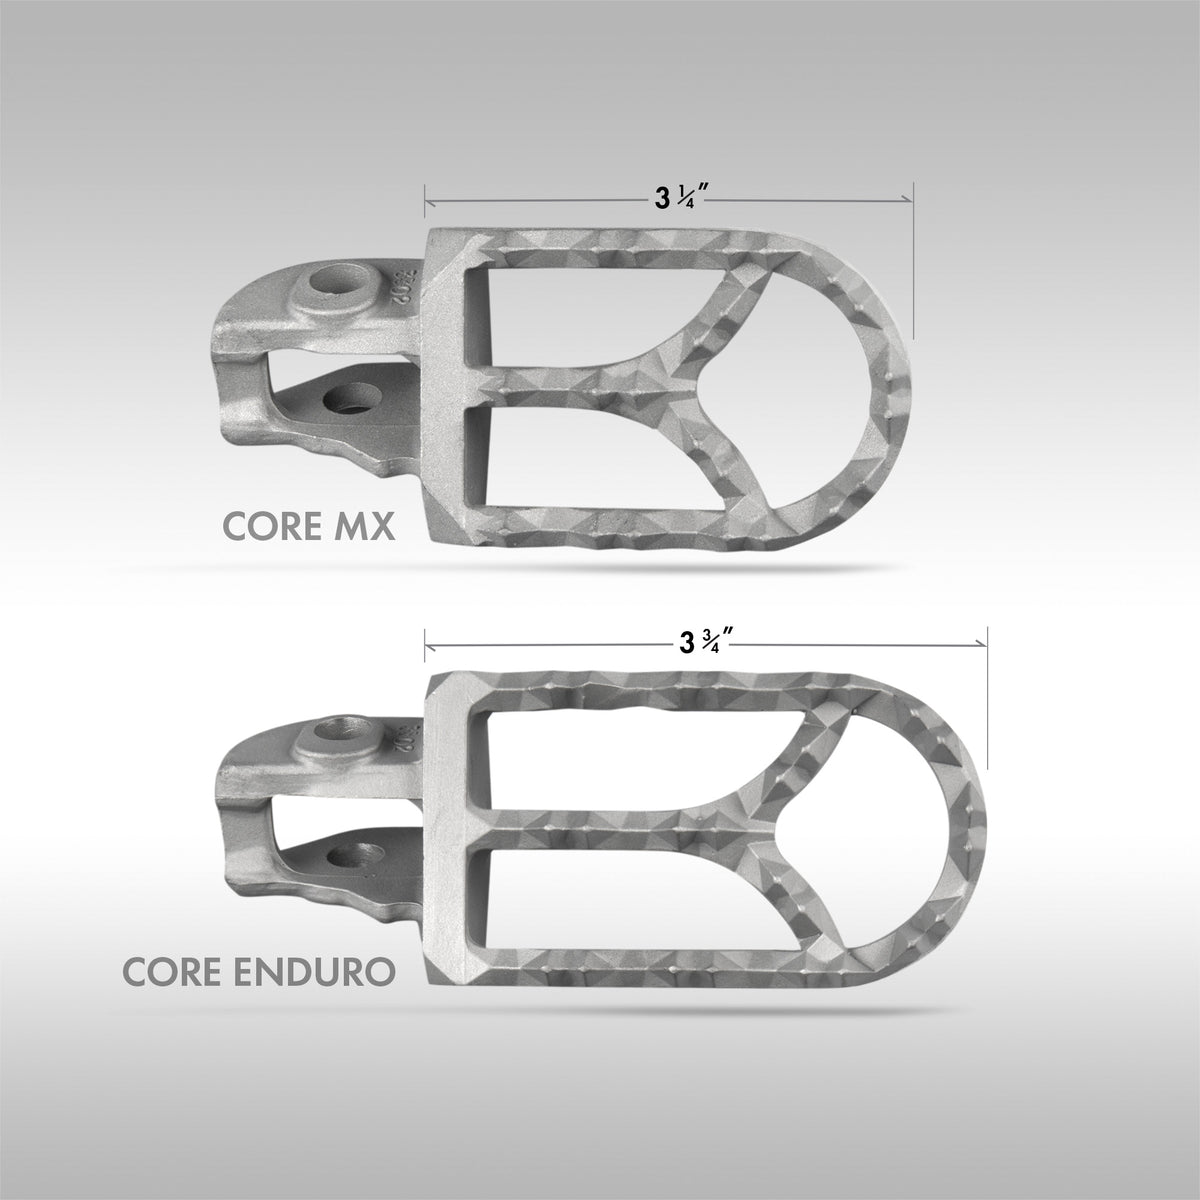 IMS PRODUCTS - CORE ENDURO FOOT PEGS - TENERE 700